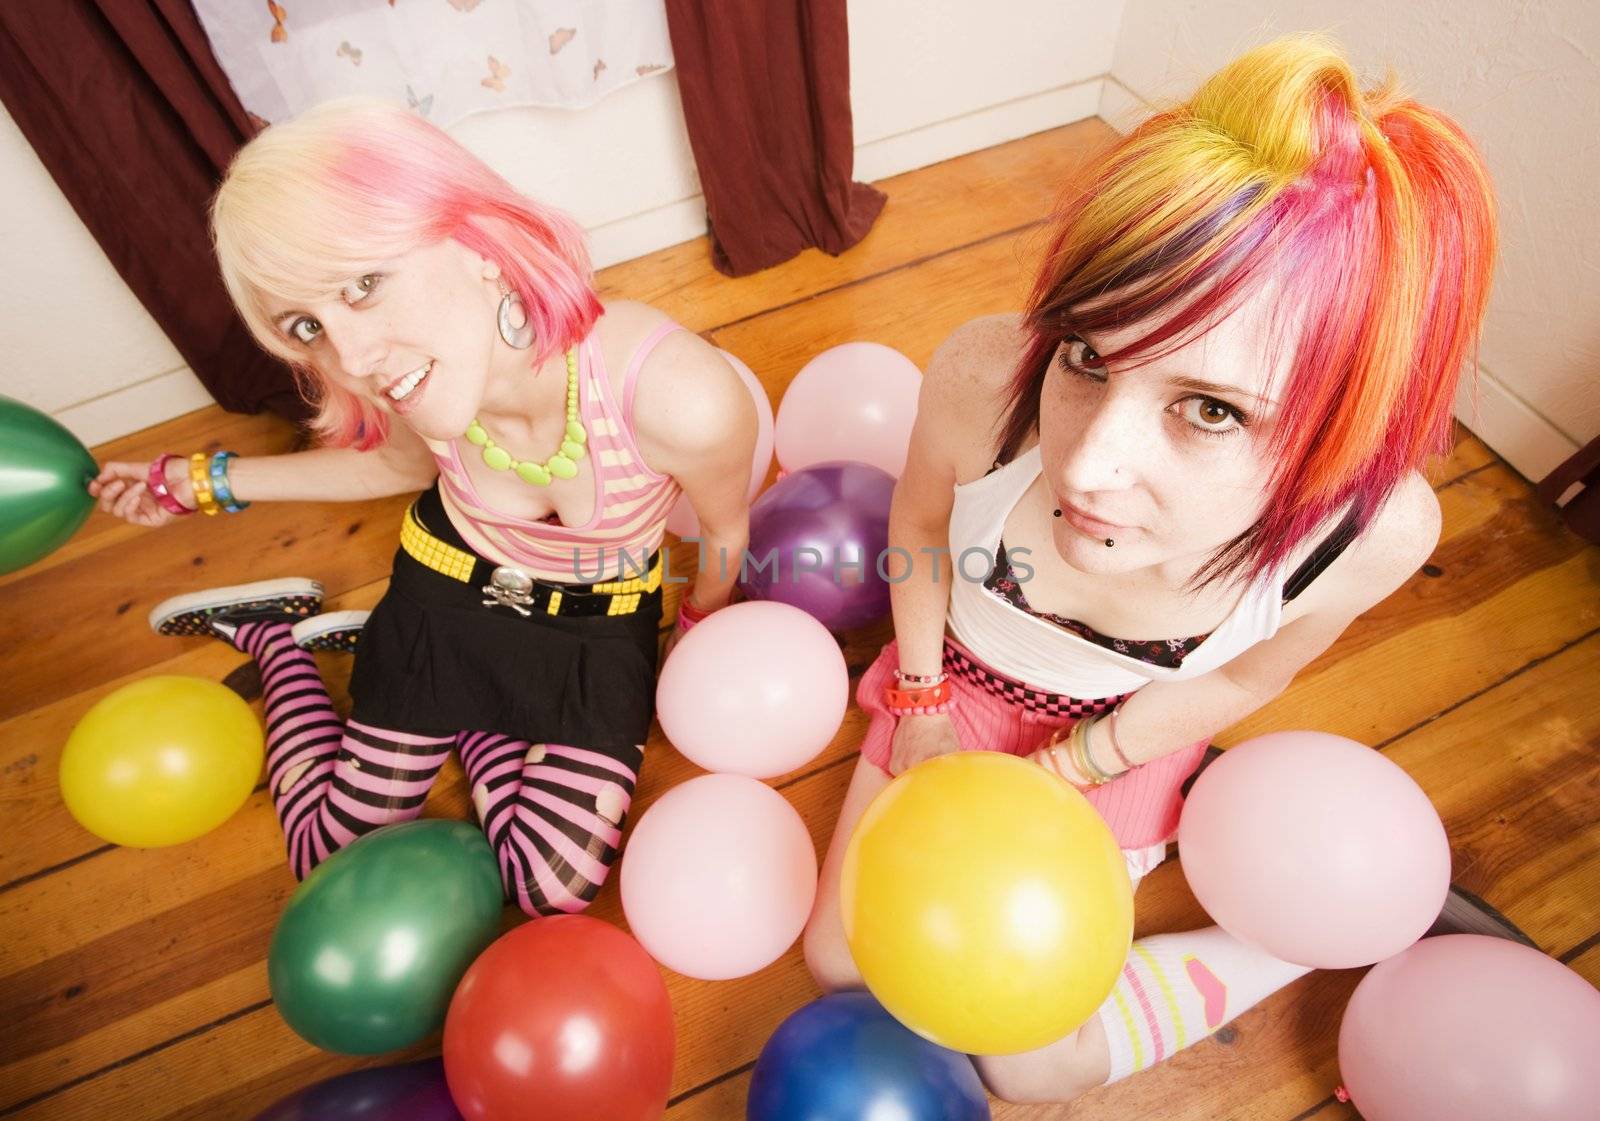 Girls With Balloons by Creatista